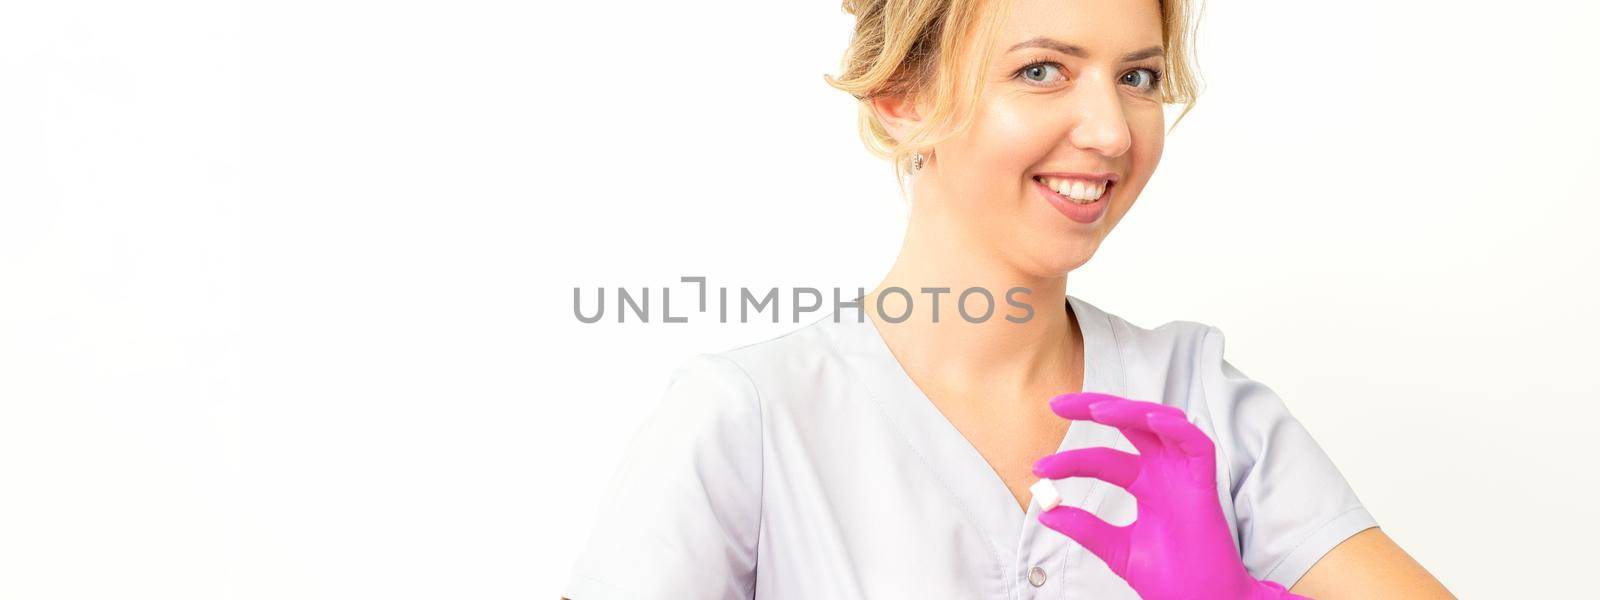 Portrait of a young smiling Caucasian beautician wearing pink gloves holding sugar cubes showing and looking at the camera against a white background. by okskukuruza